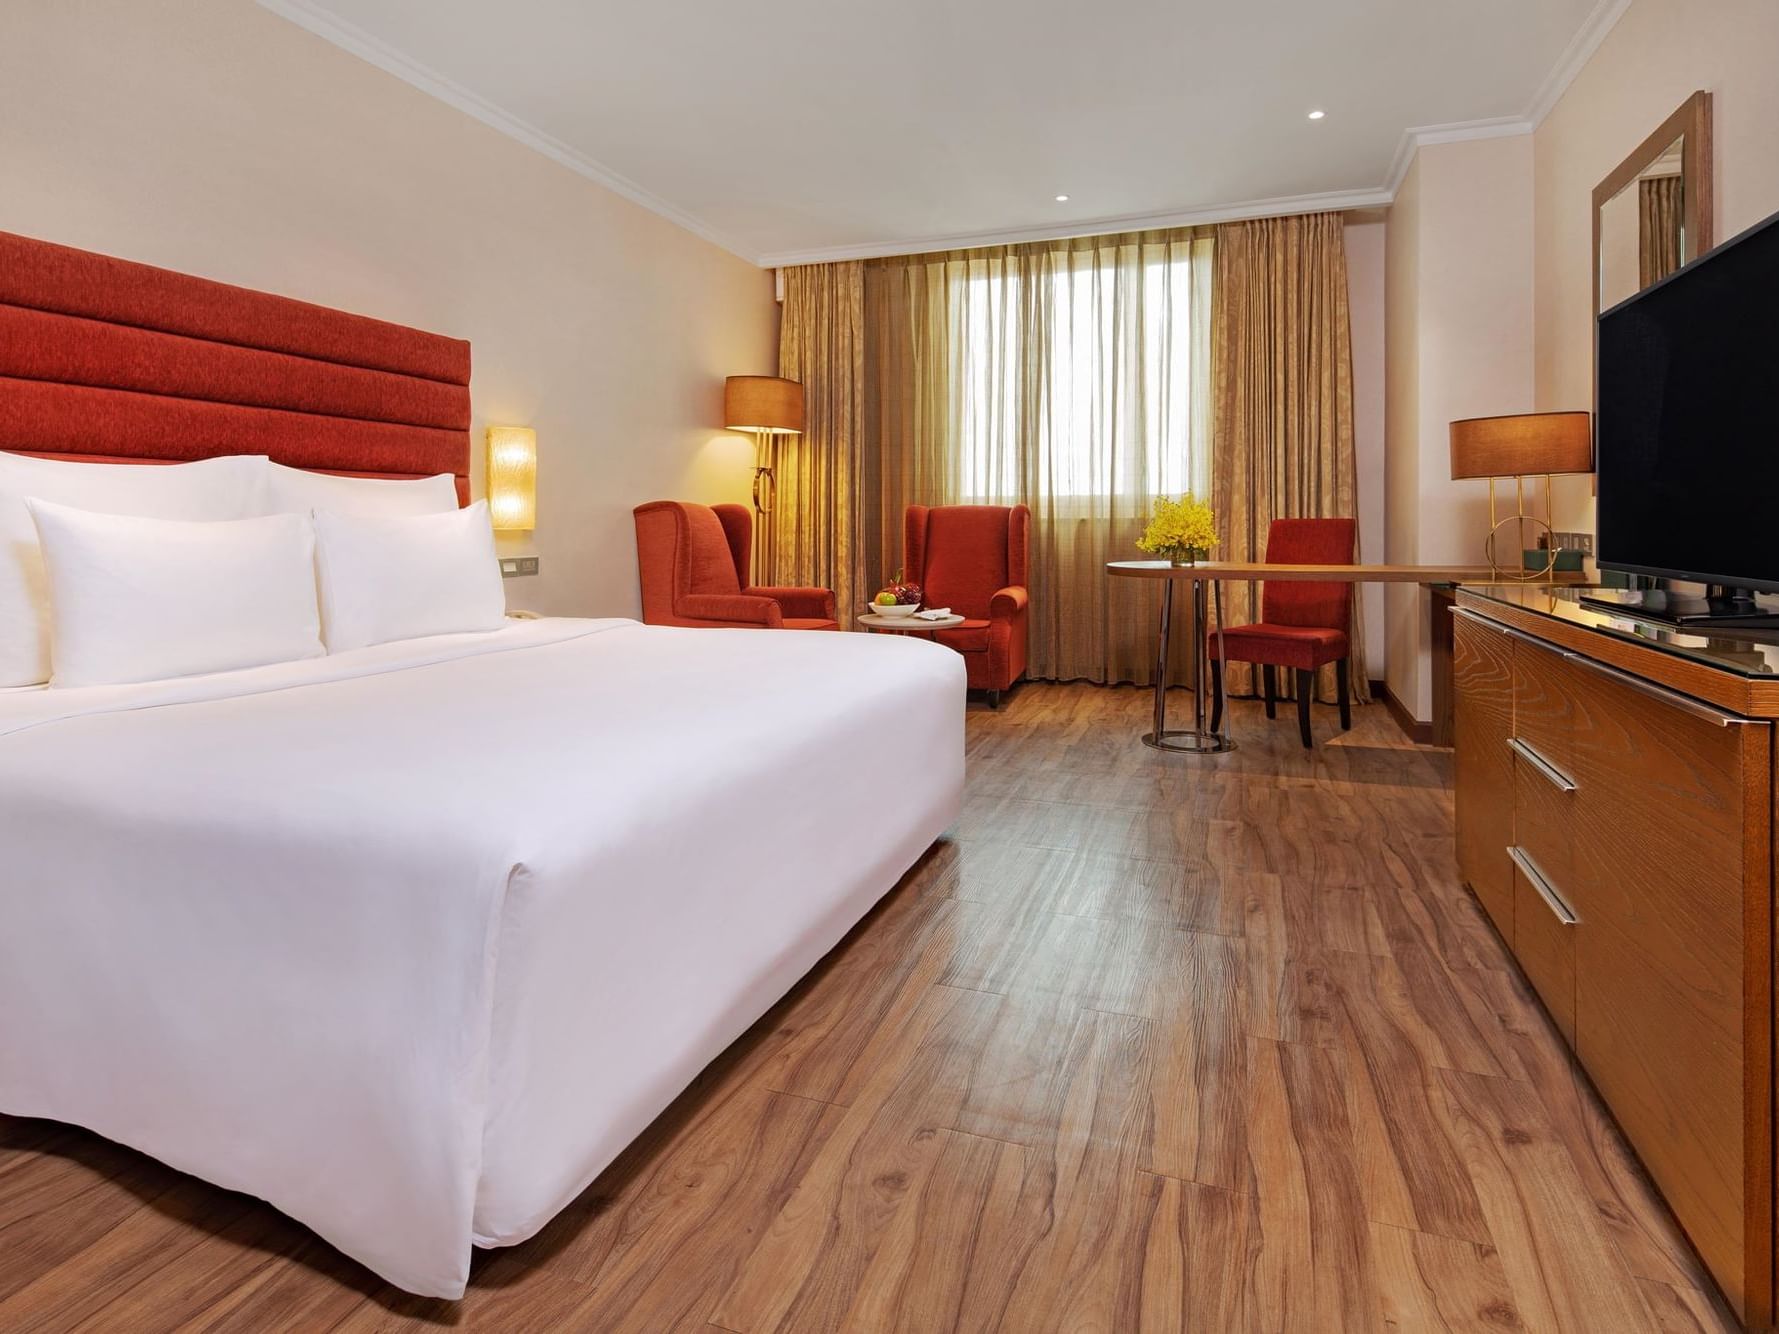 spacious hotel room with wood and red cushion furnishings